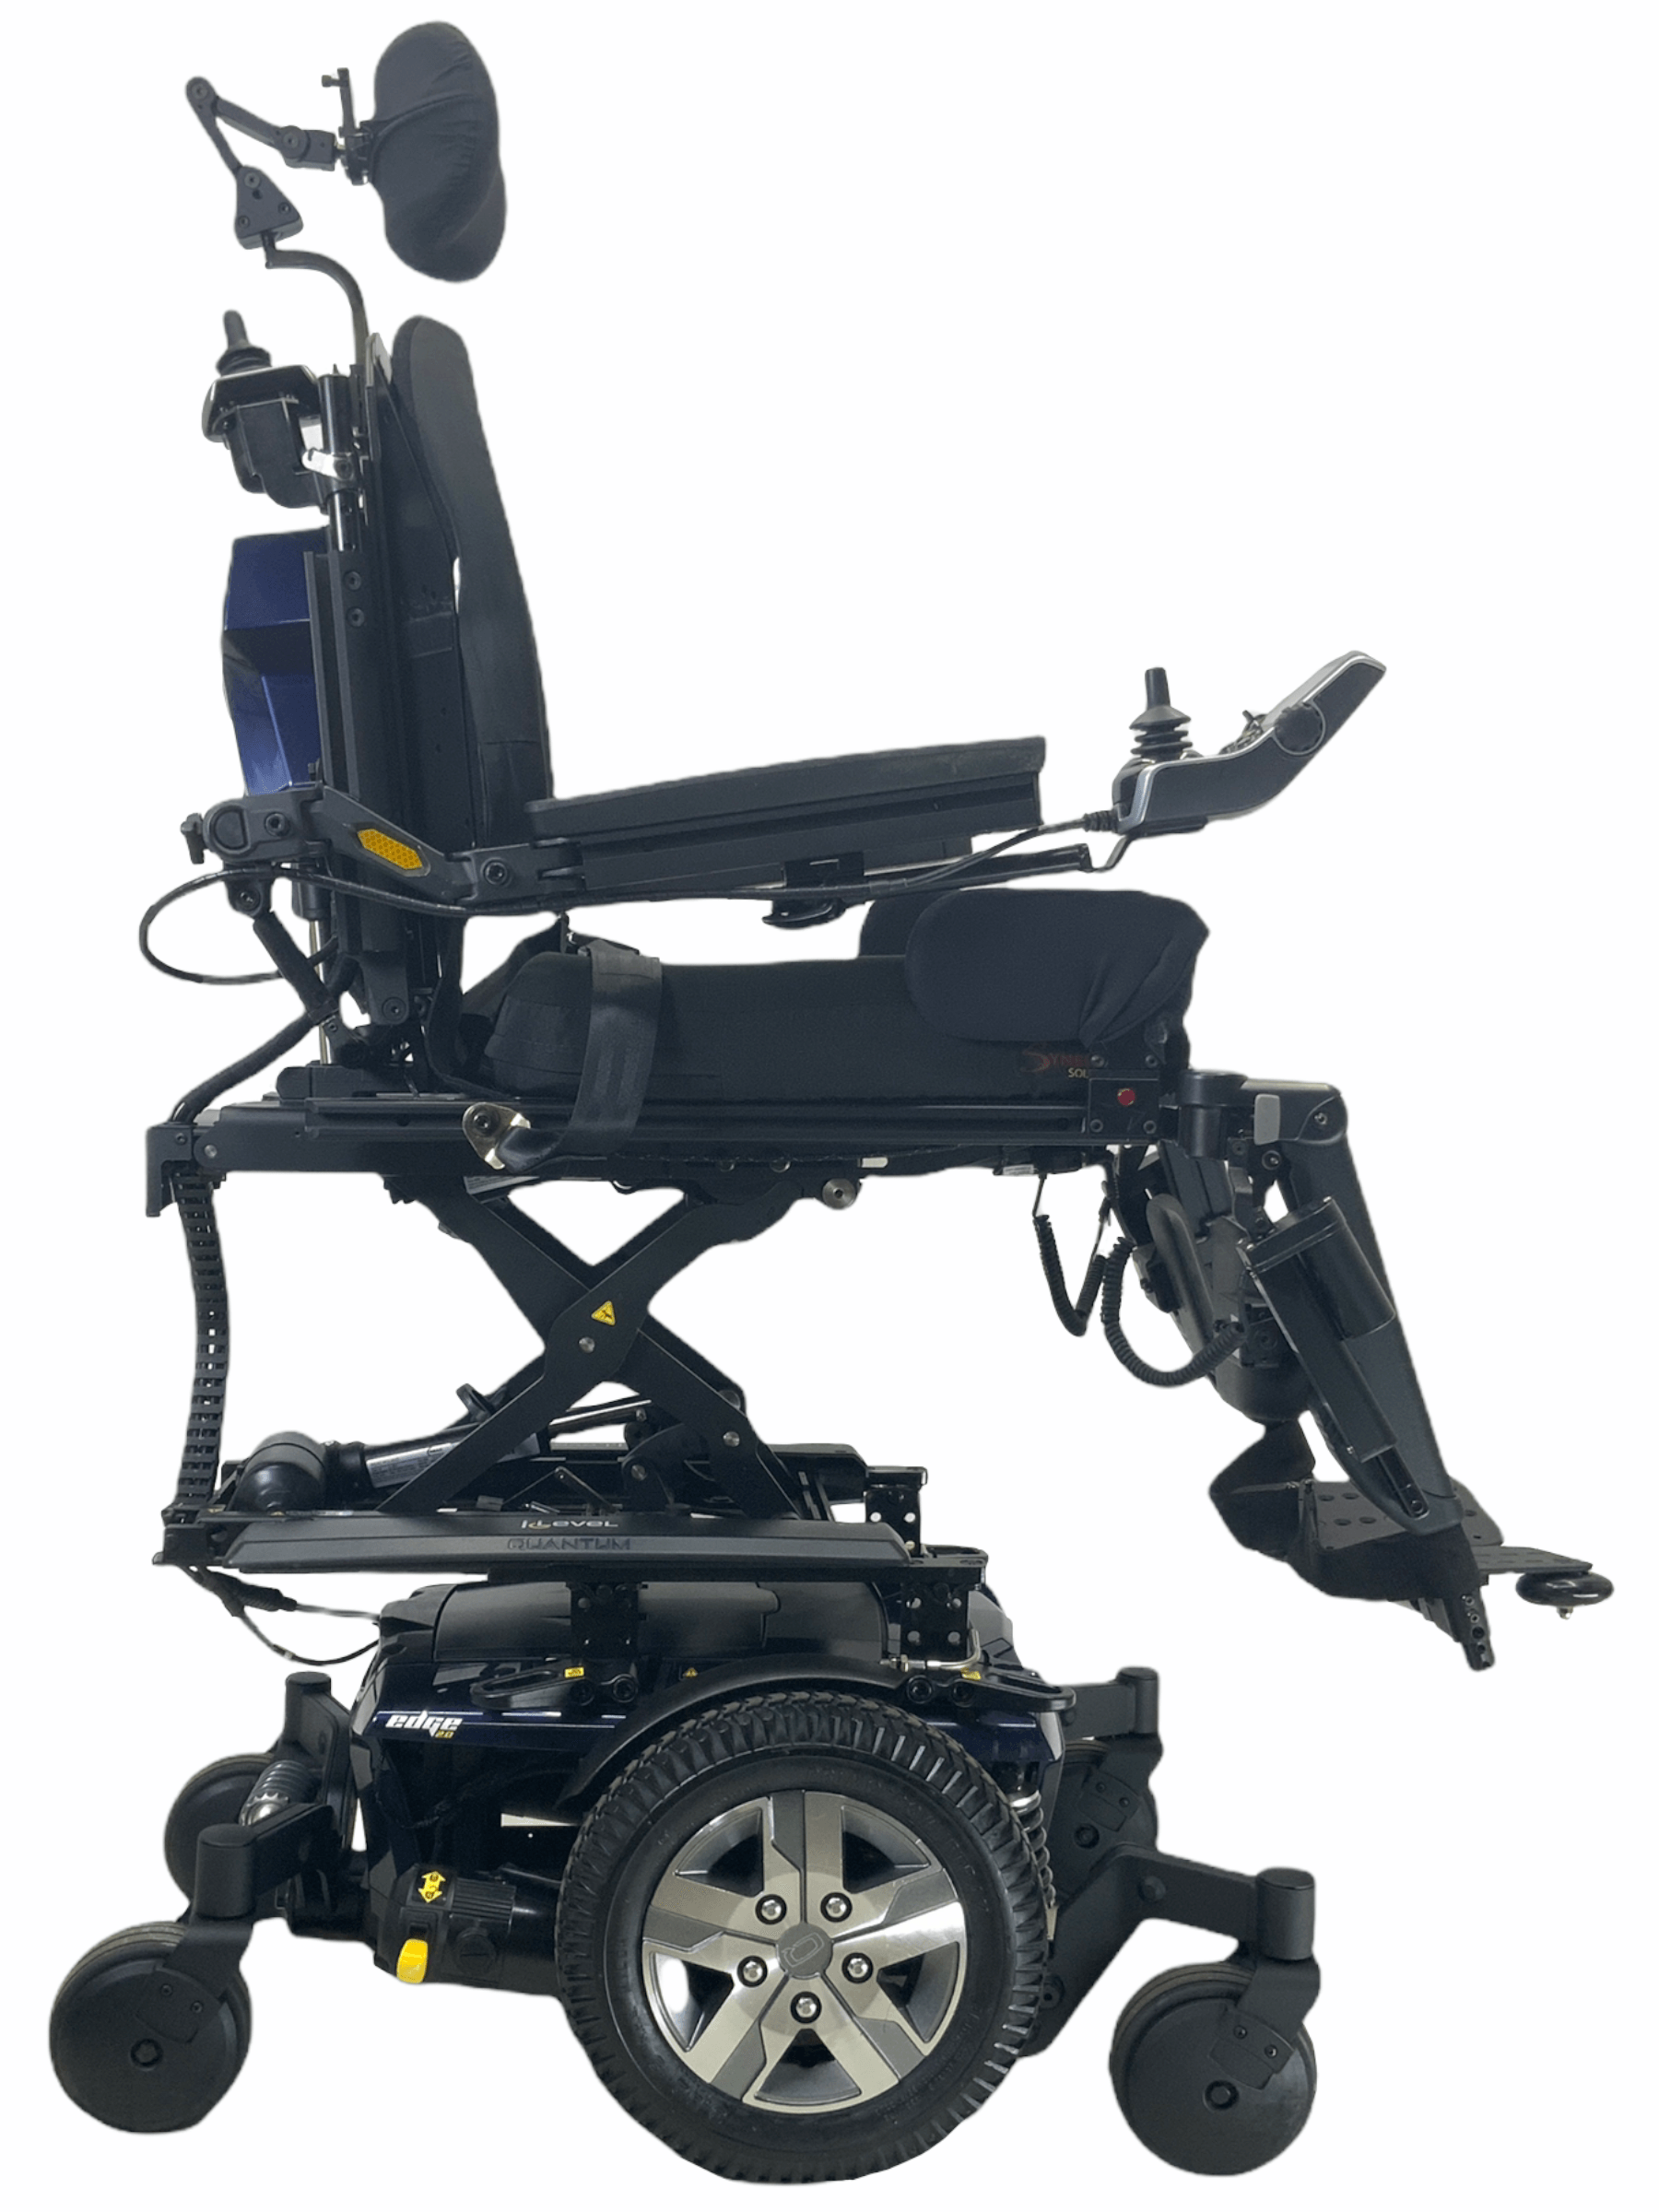 Quantum 2.0 Wheelchair | Seat Elevate, Recline, More! – Mobility Equipment for Less